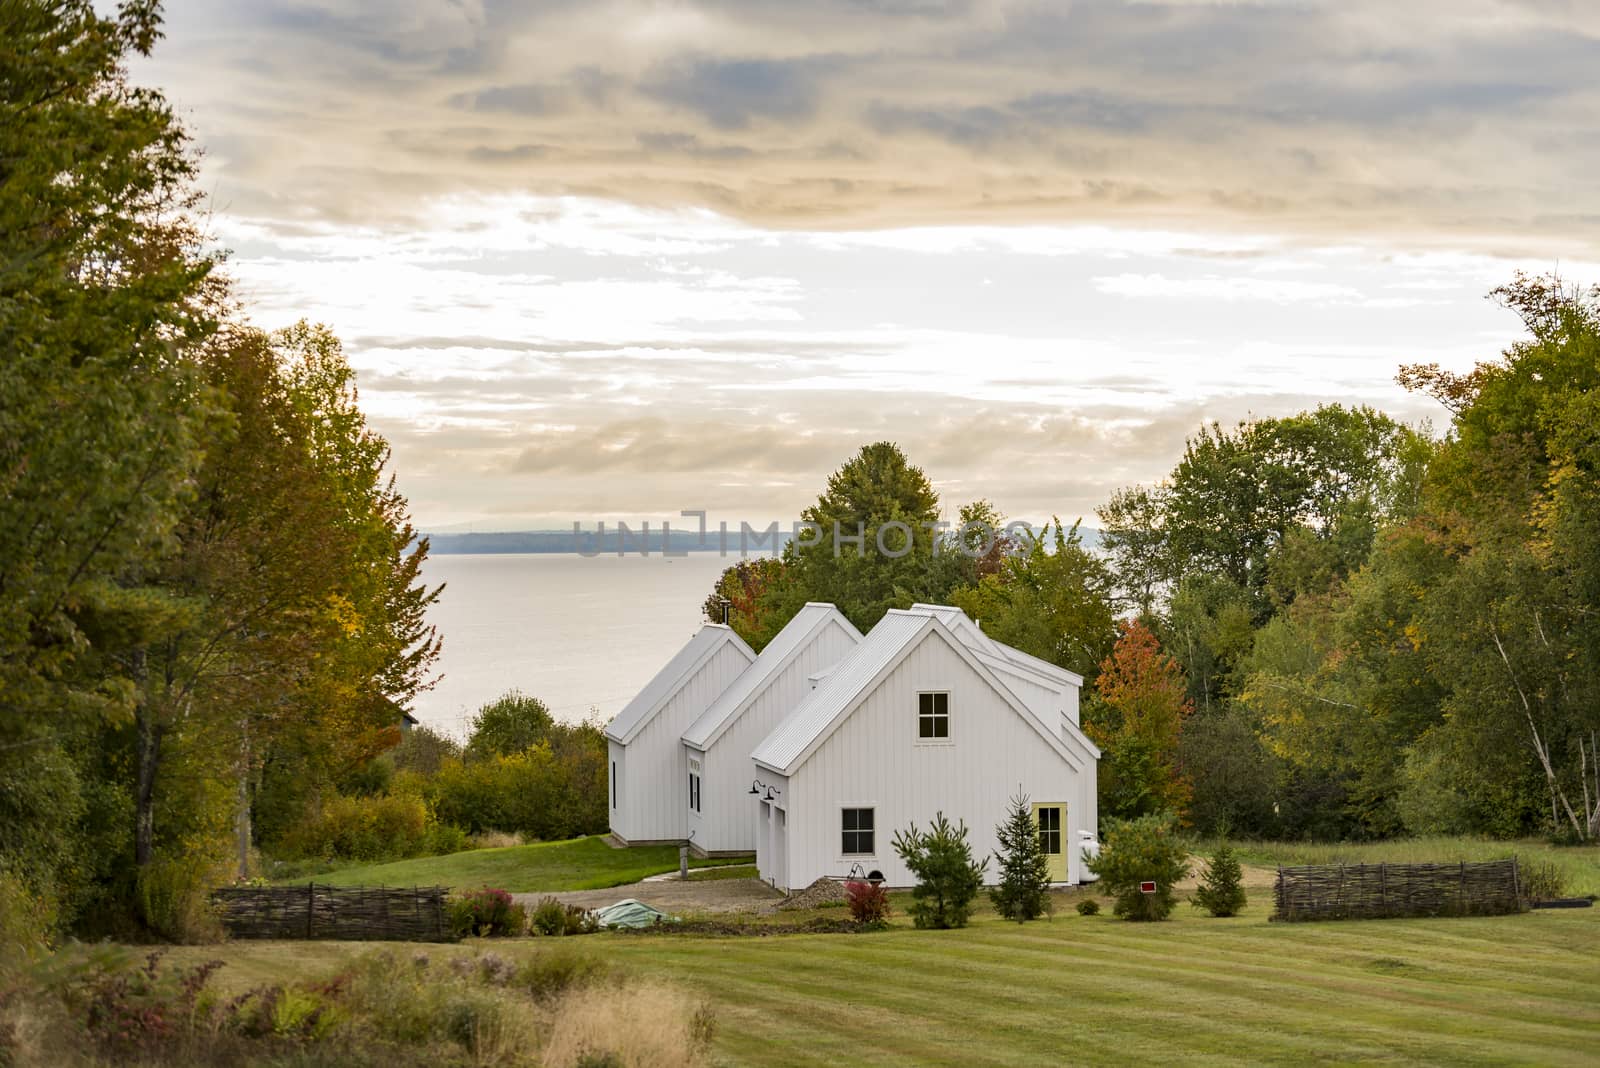 New England traditional house in the fall by edella